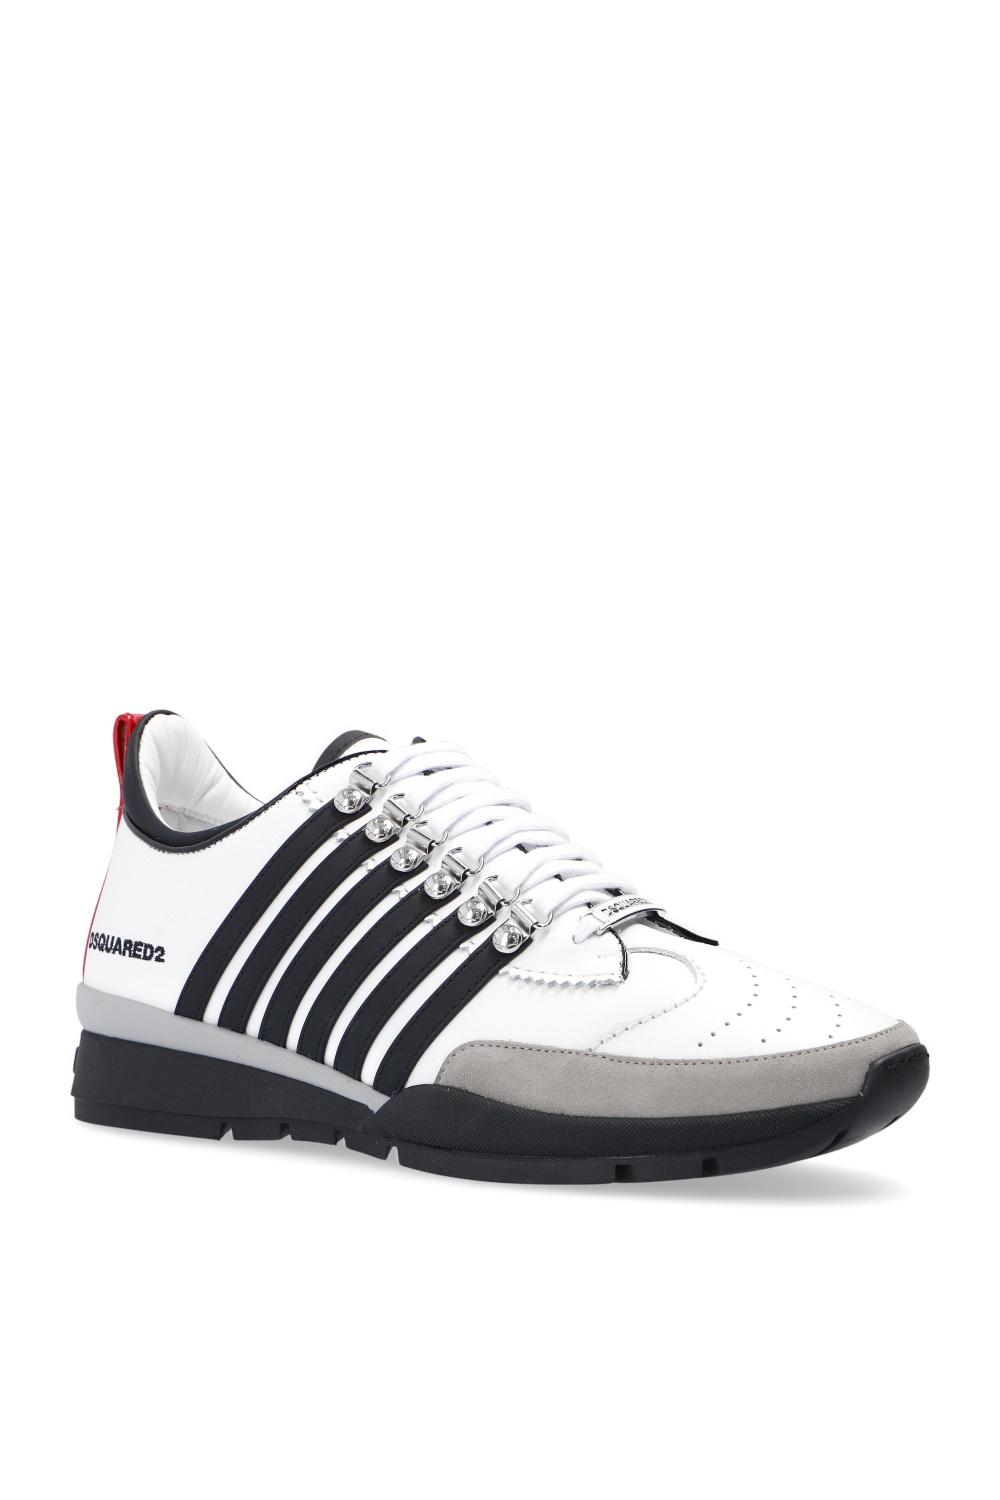 Dsquared2 ‘251’ sneakers